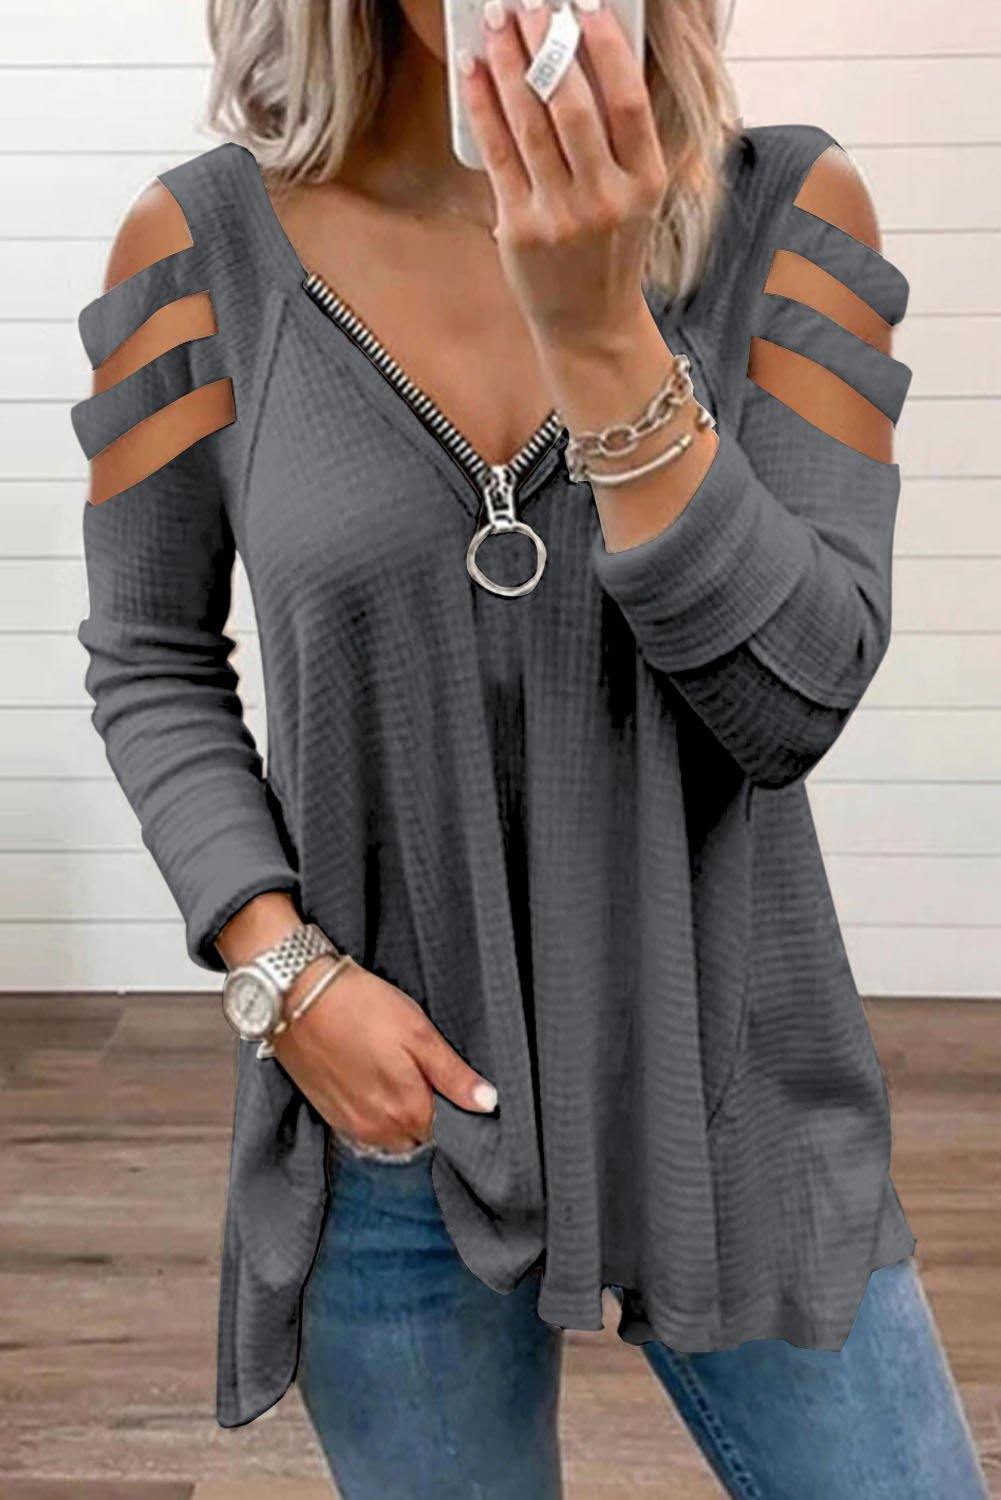 Zip Neck Cut-out Waffle Knit Long Sleeve Top - L & M Kee, LLC